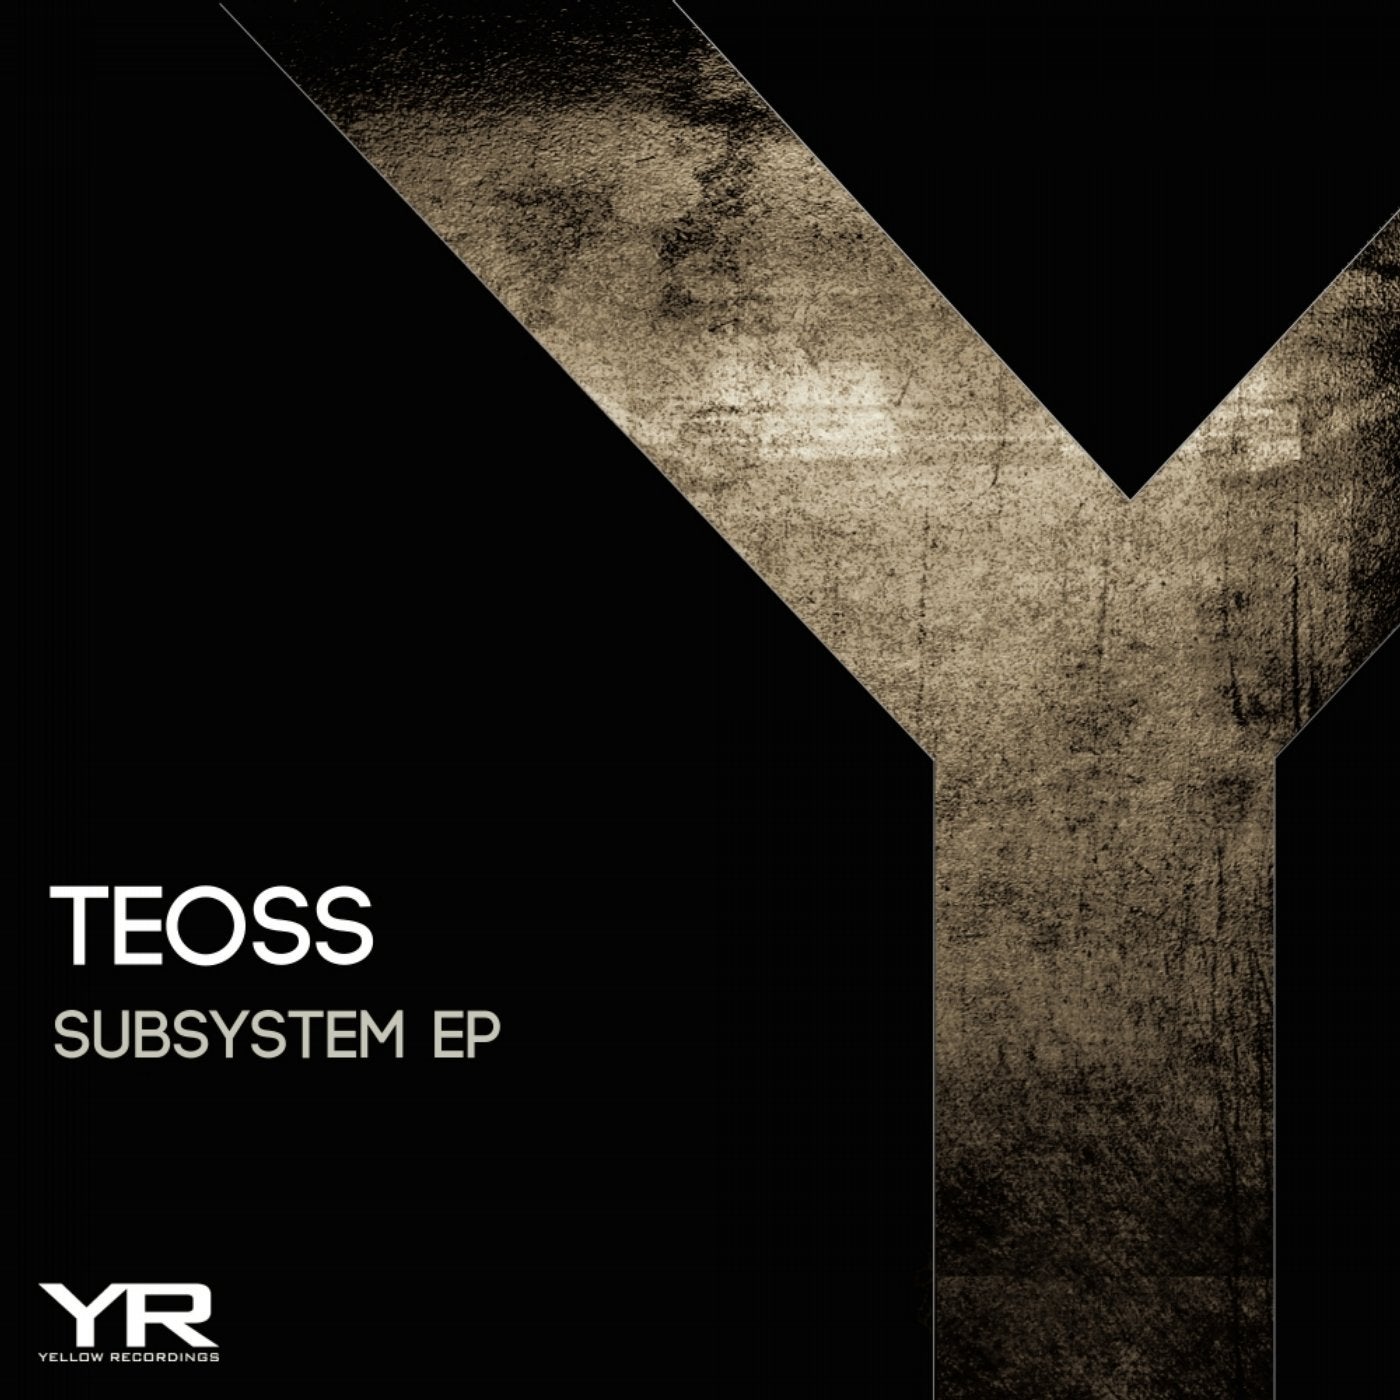 Subsystem EP